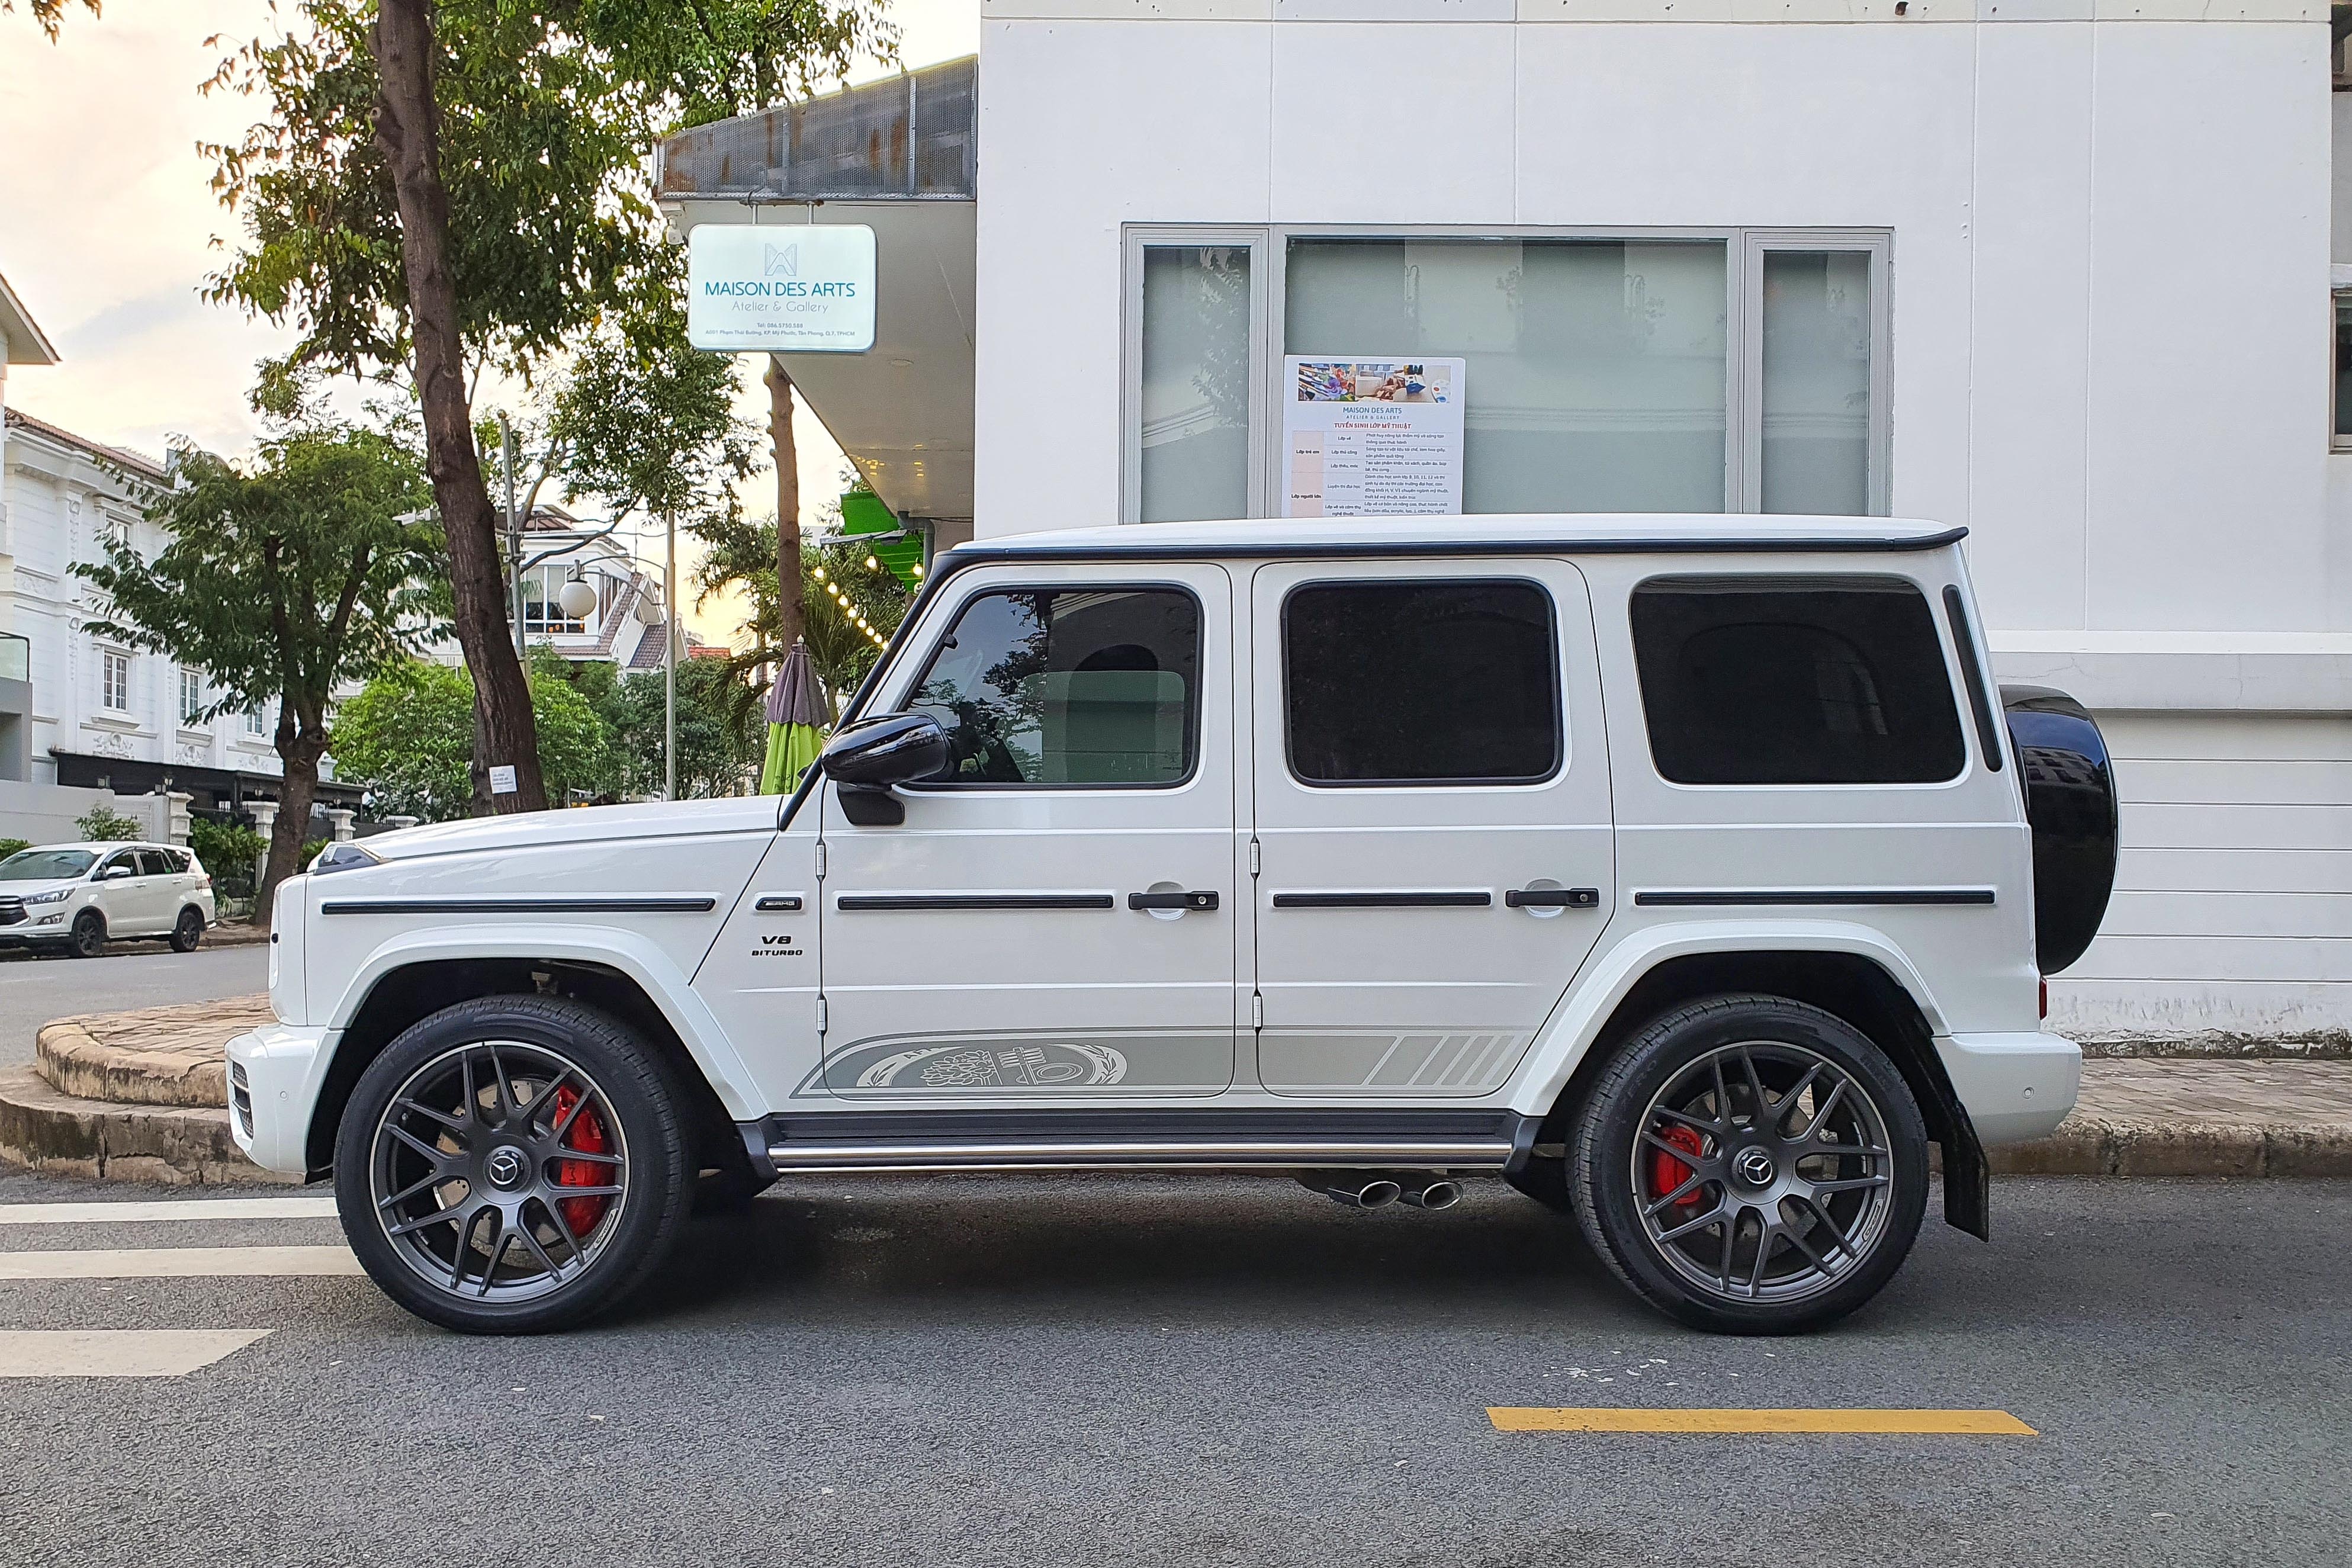 mercedes,  benz,  mercedes-benz,  amg,  mercedes-amg,  g63,  g 63,  edition 55,  g63 edition 55,  suv,  hieu suat cao,  g 63 edition 55 anh 10